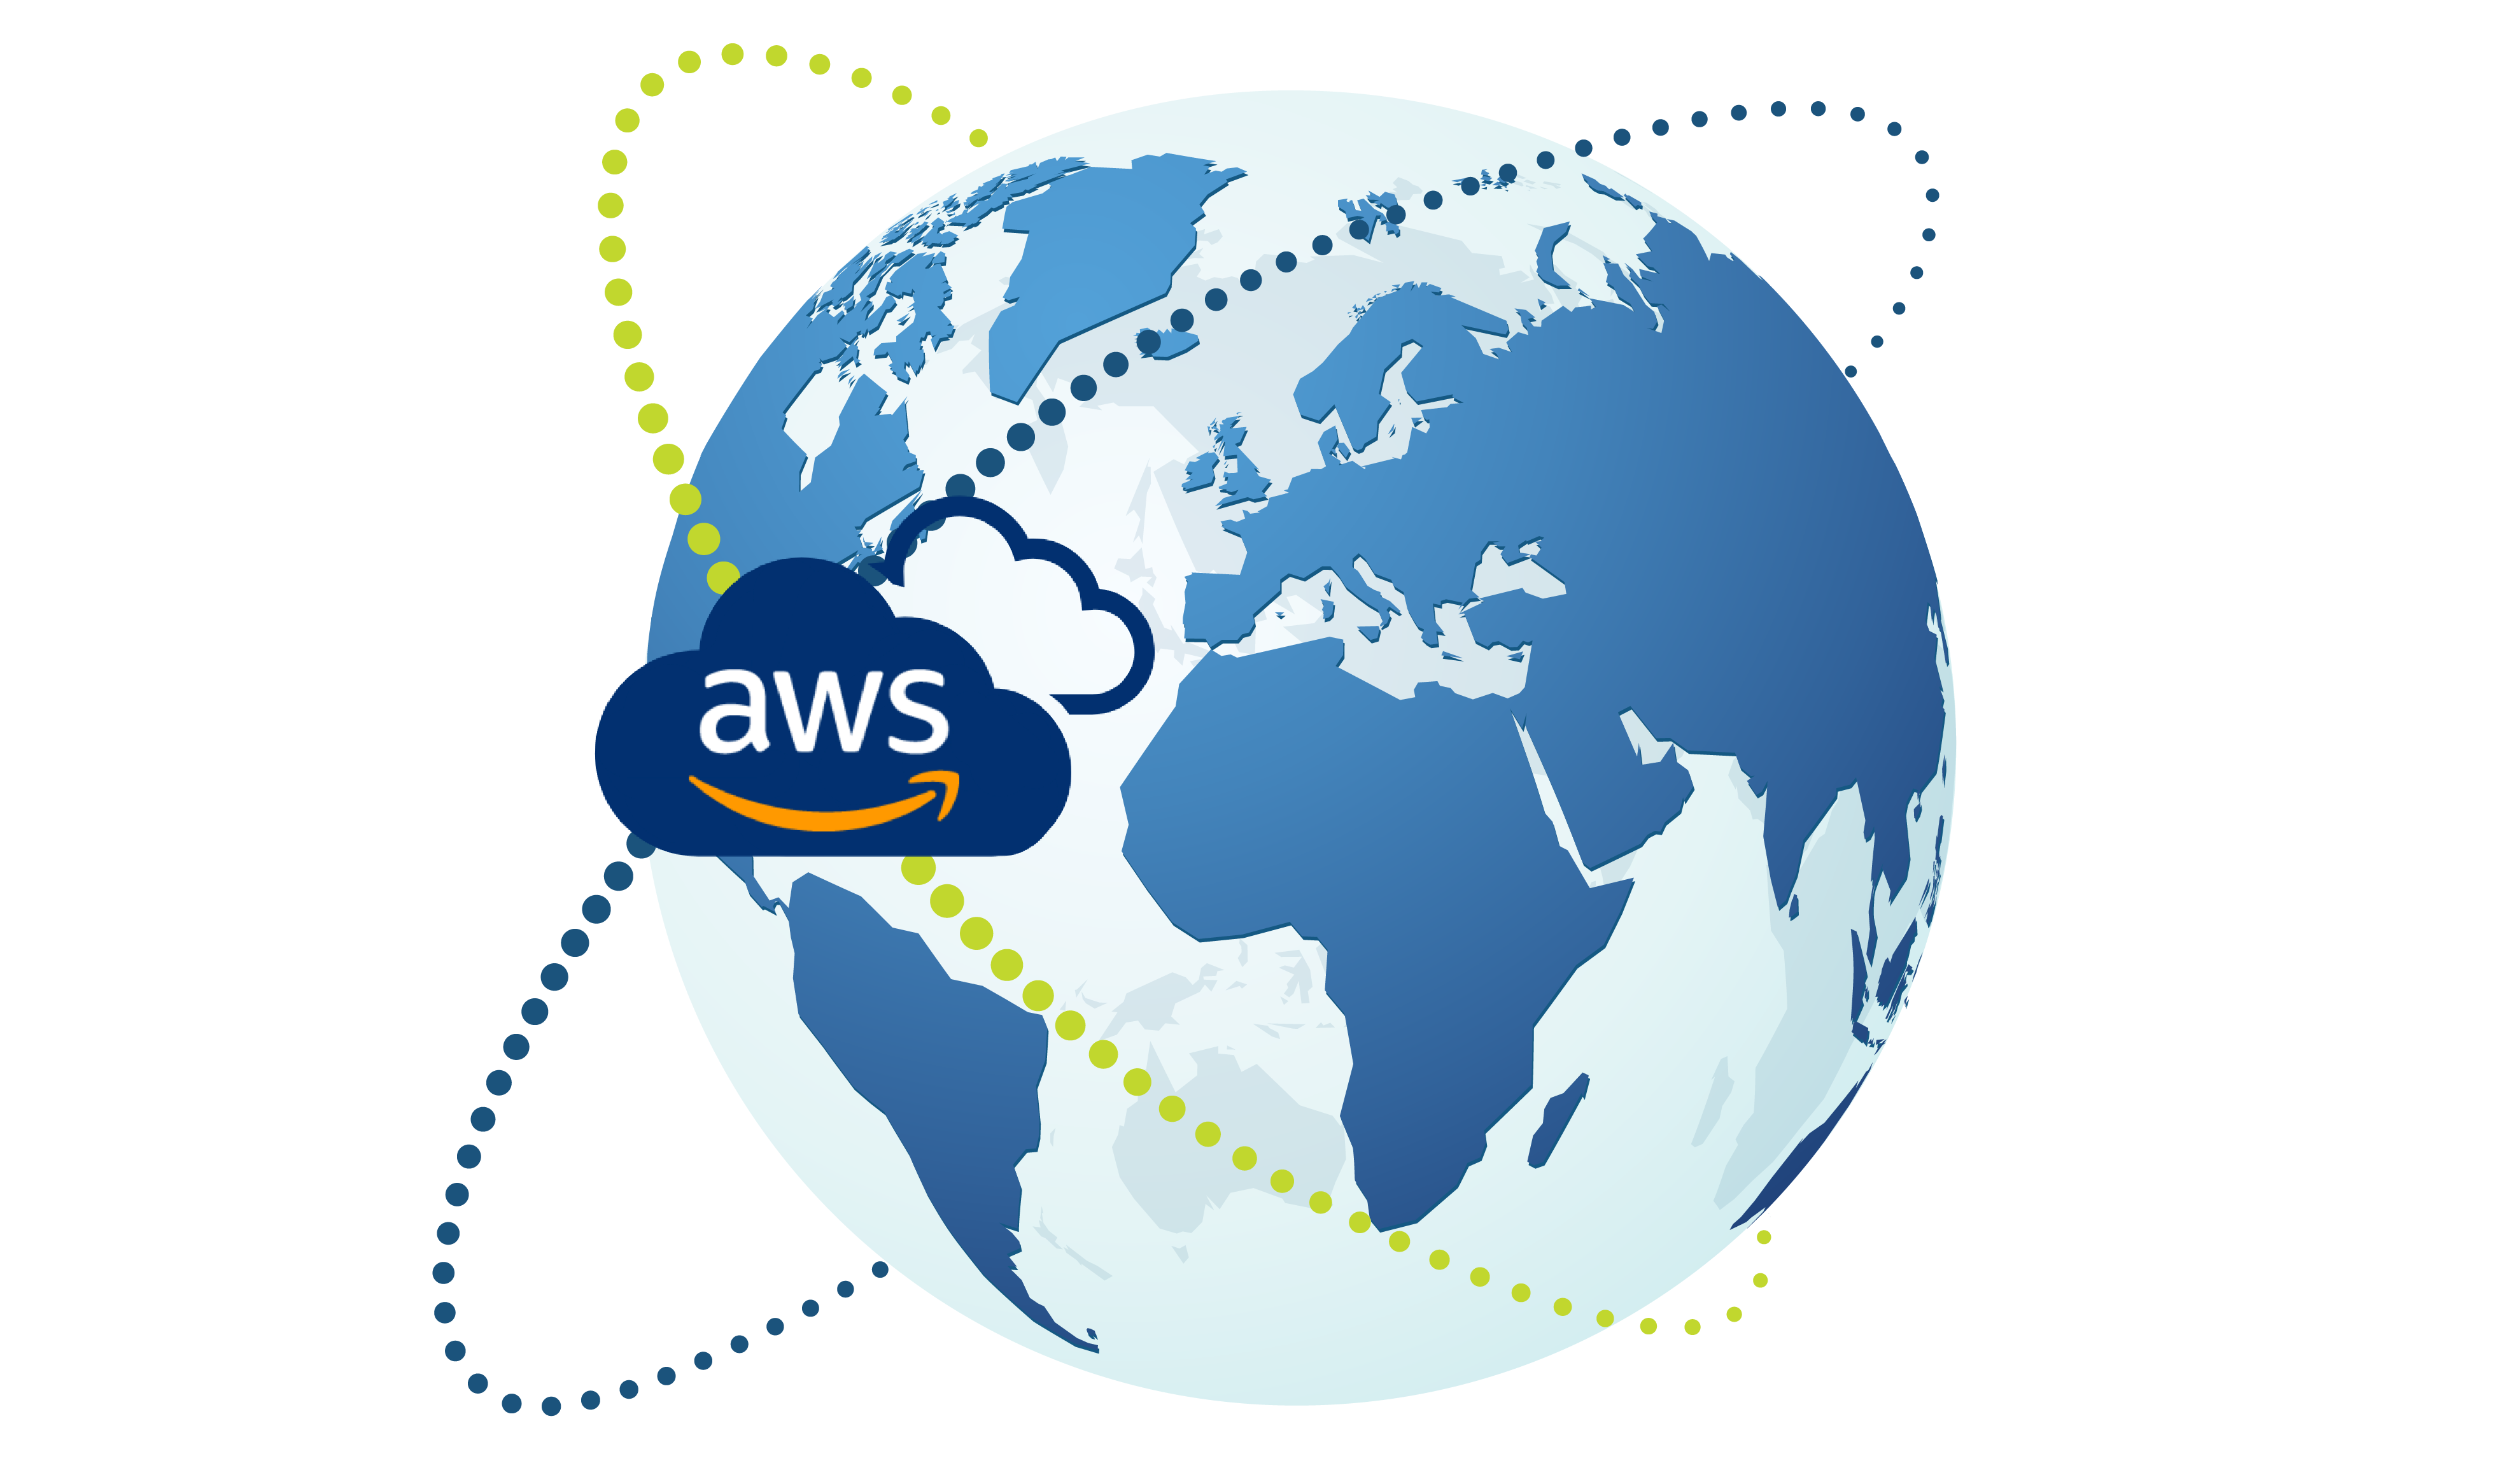 A globe with CloudFront edge locations connected by speedy, flowing data streams to a central AWS cloud icon, showcasing global reach and efficiency.